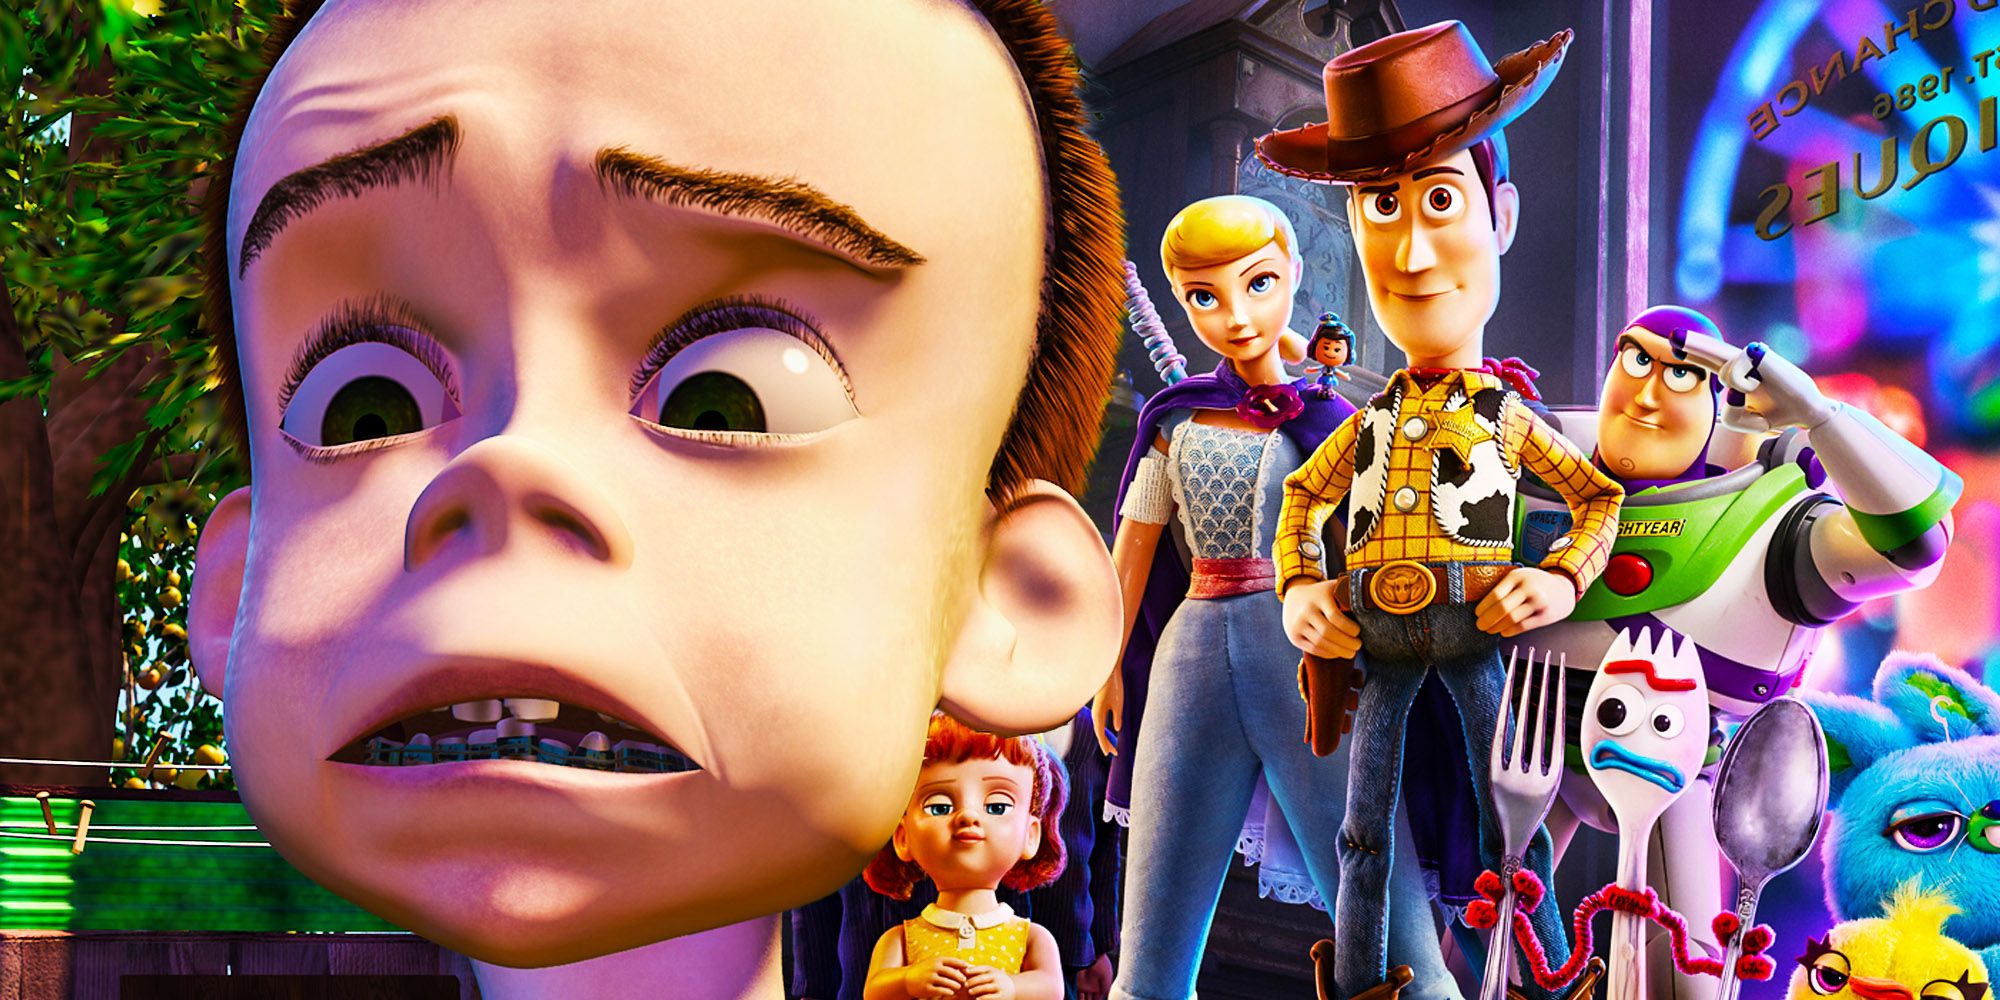 10 Dark Implications Of Toy Story That Everyone Missed As A Kid